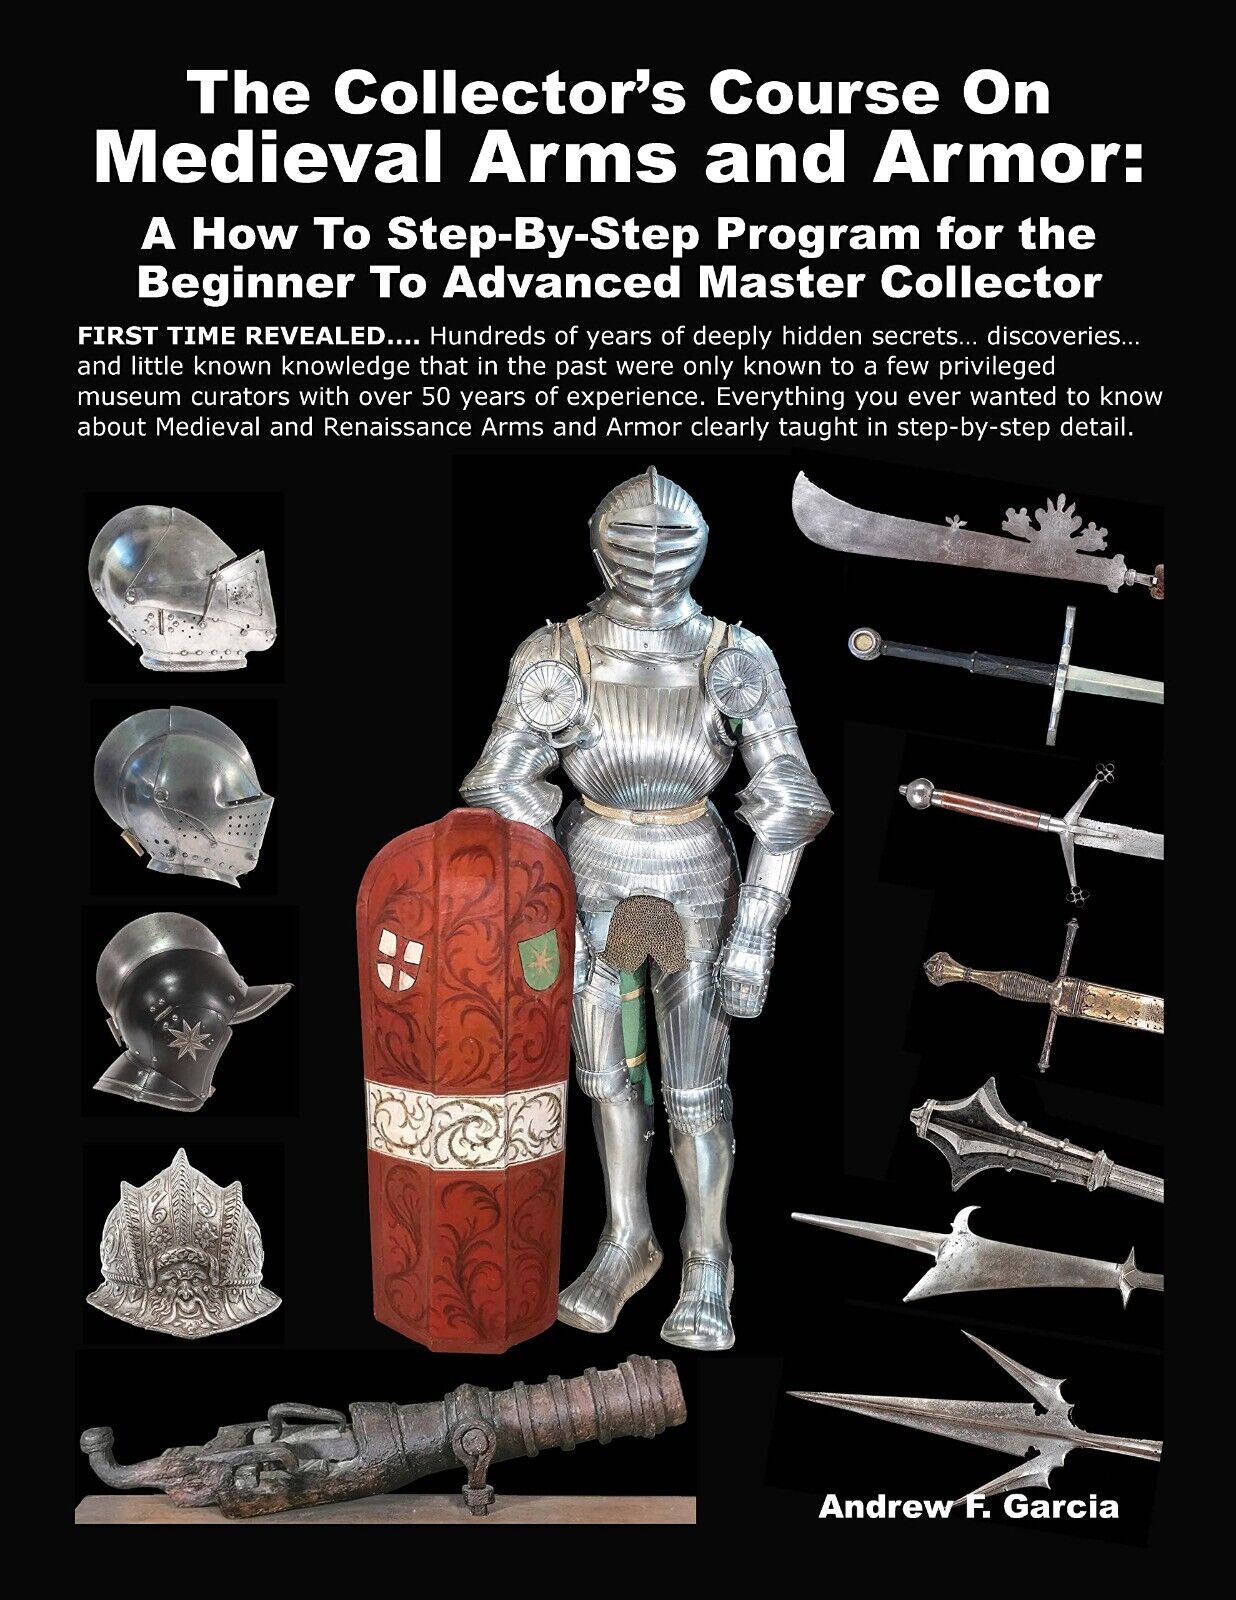 The Collector’s Course on Medieval Arms and Armor: A How To Step-By-Step Program